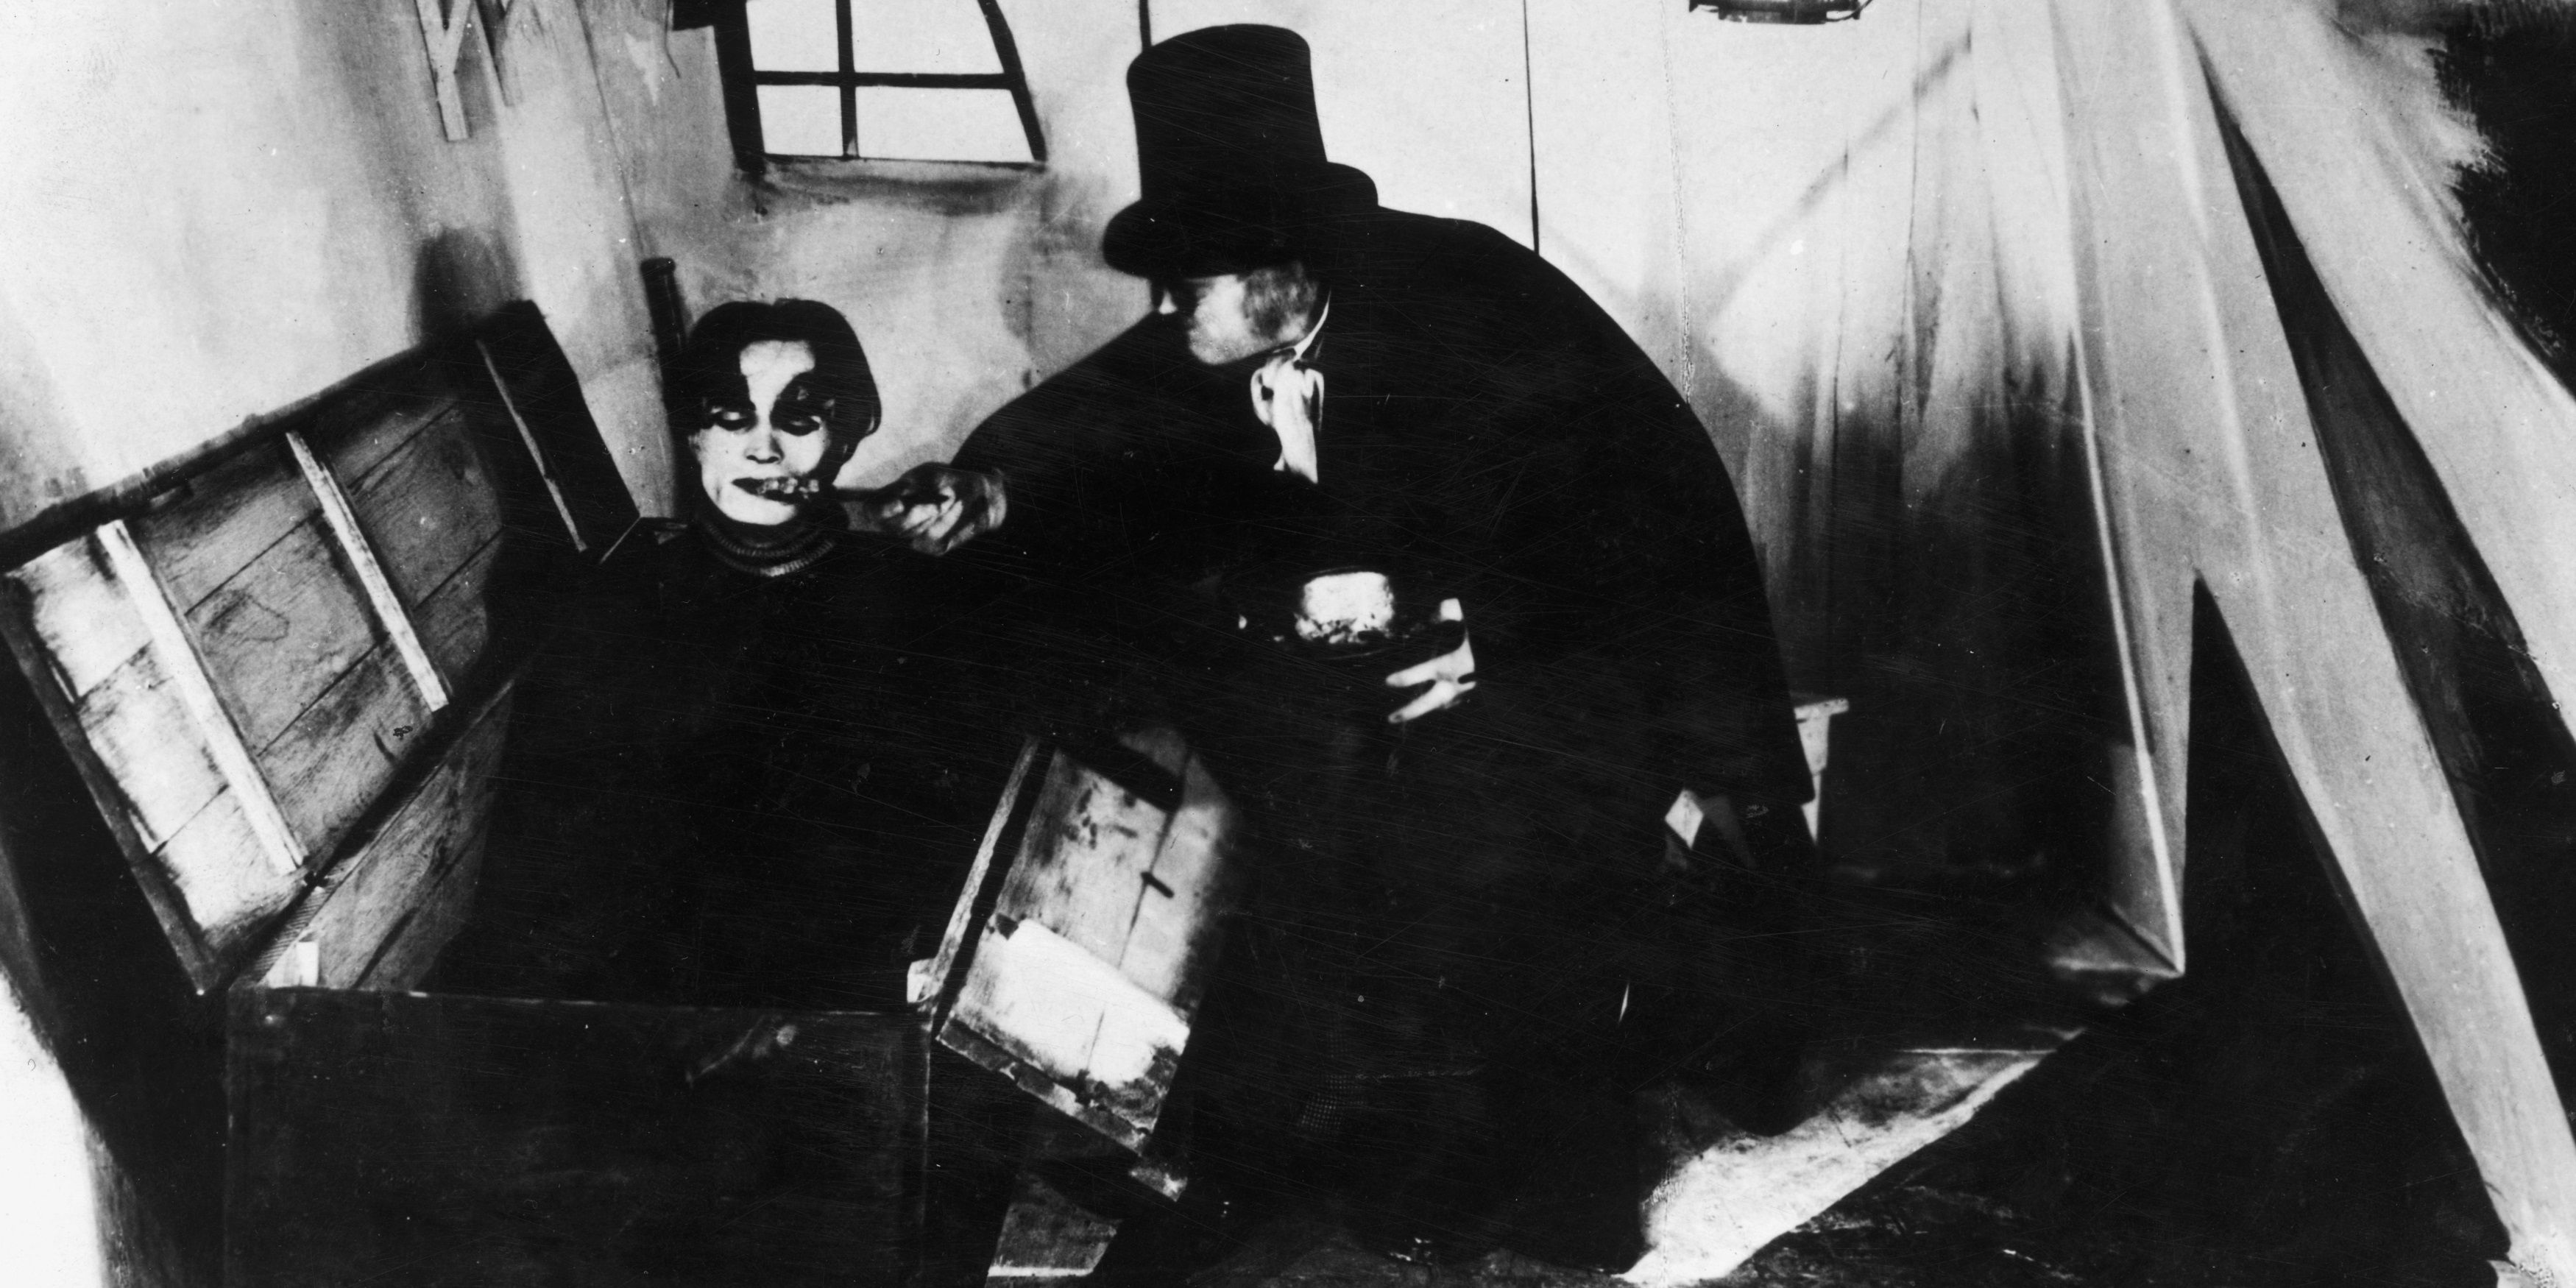 Expressionist set design in The Cabinet of Dr Caligari